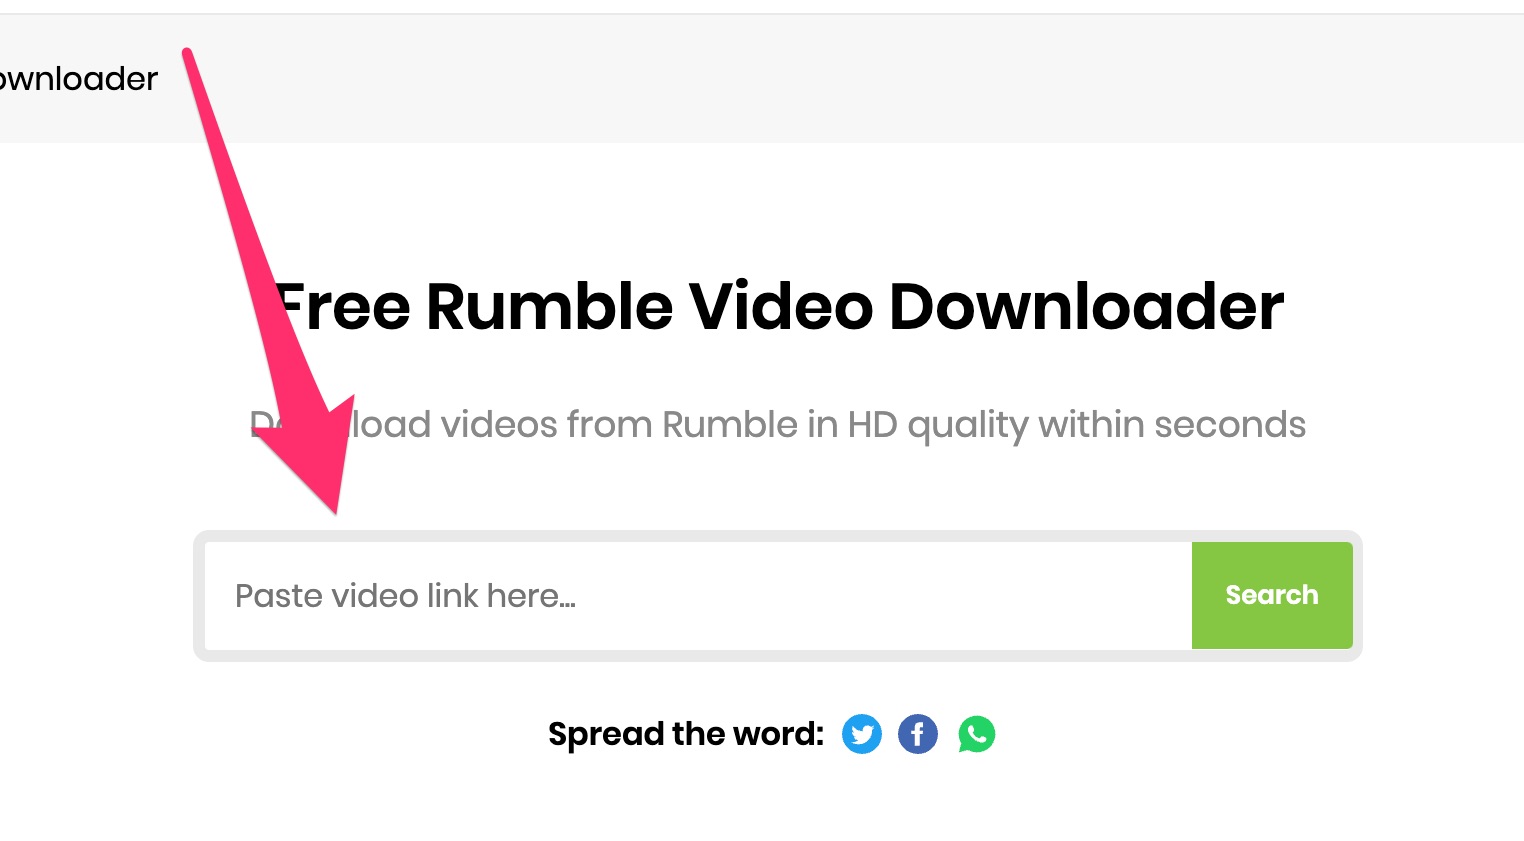 paste Rumble video link in search bar